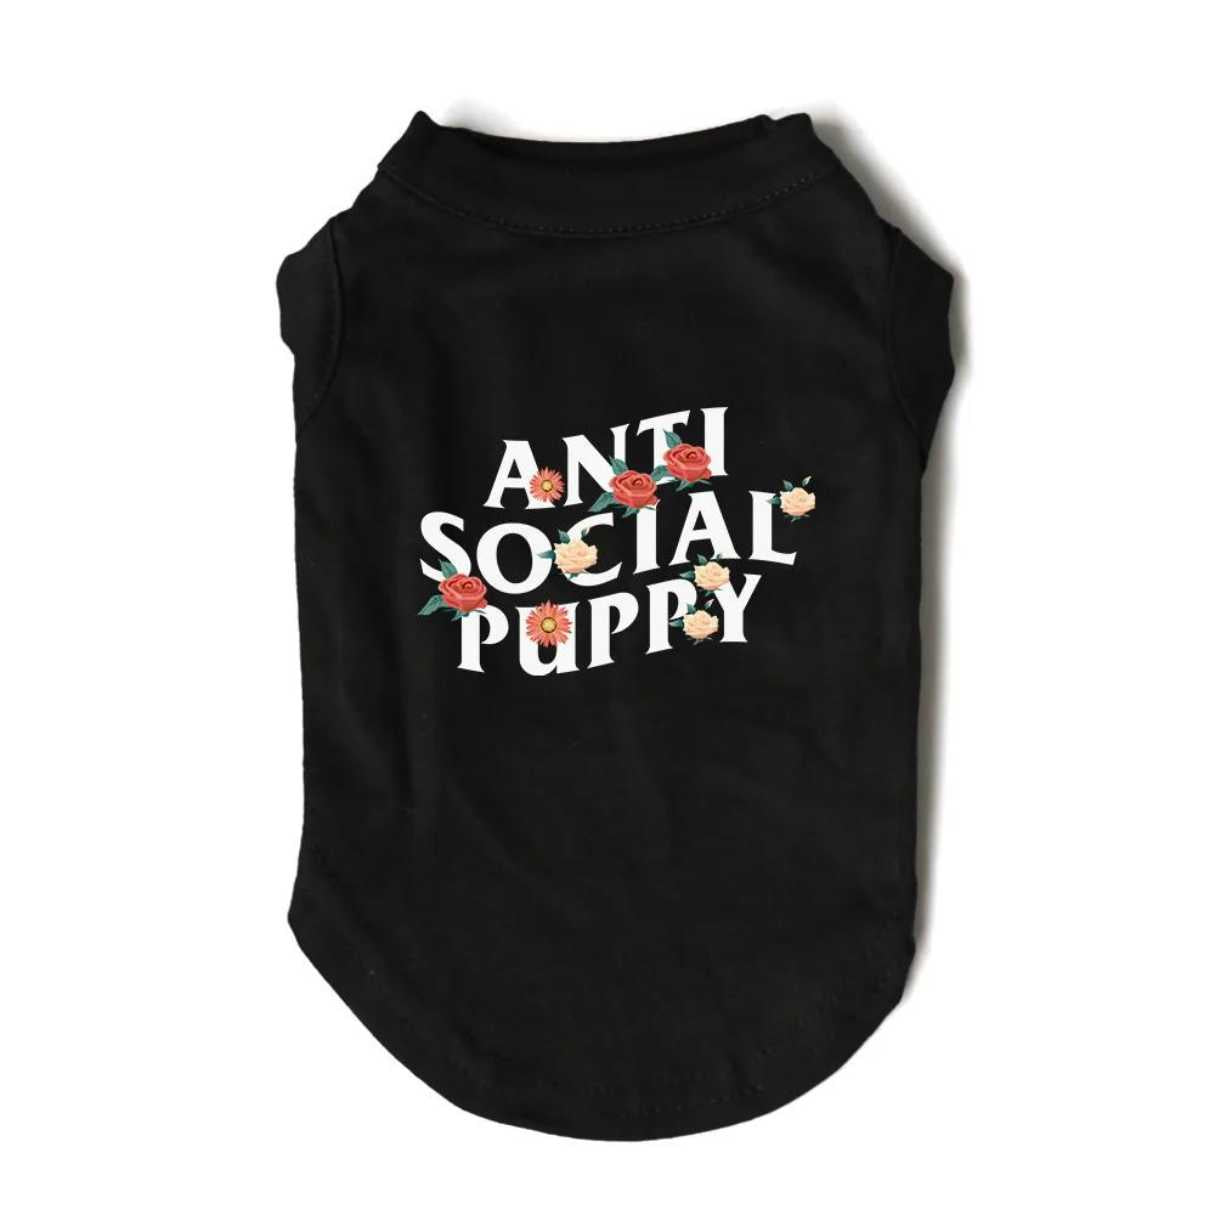 Anti Social Black Puppy Dog Tshirt with flowers on the tshirt, singlets, sleeveless clothes